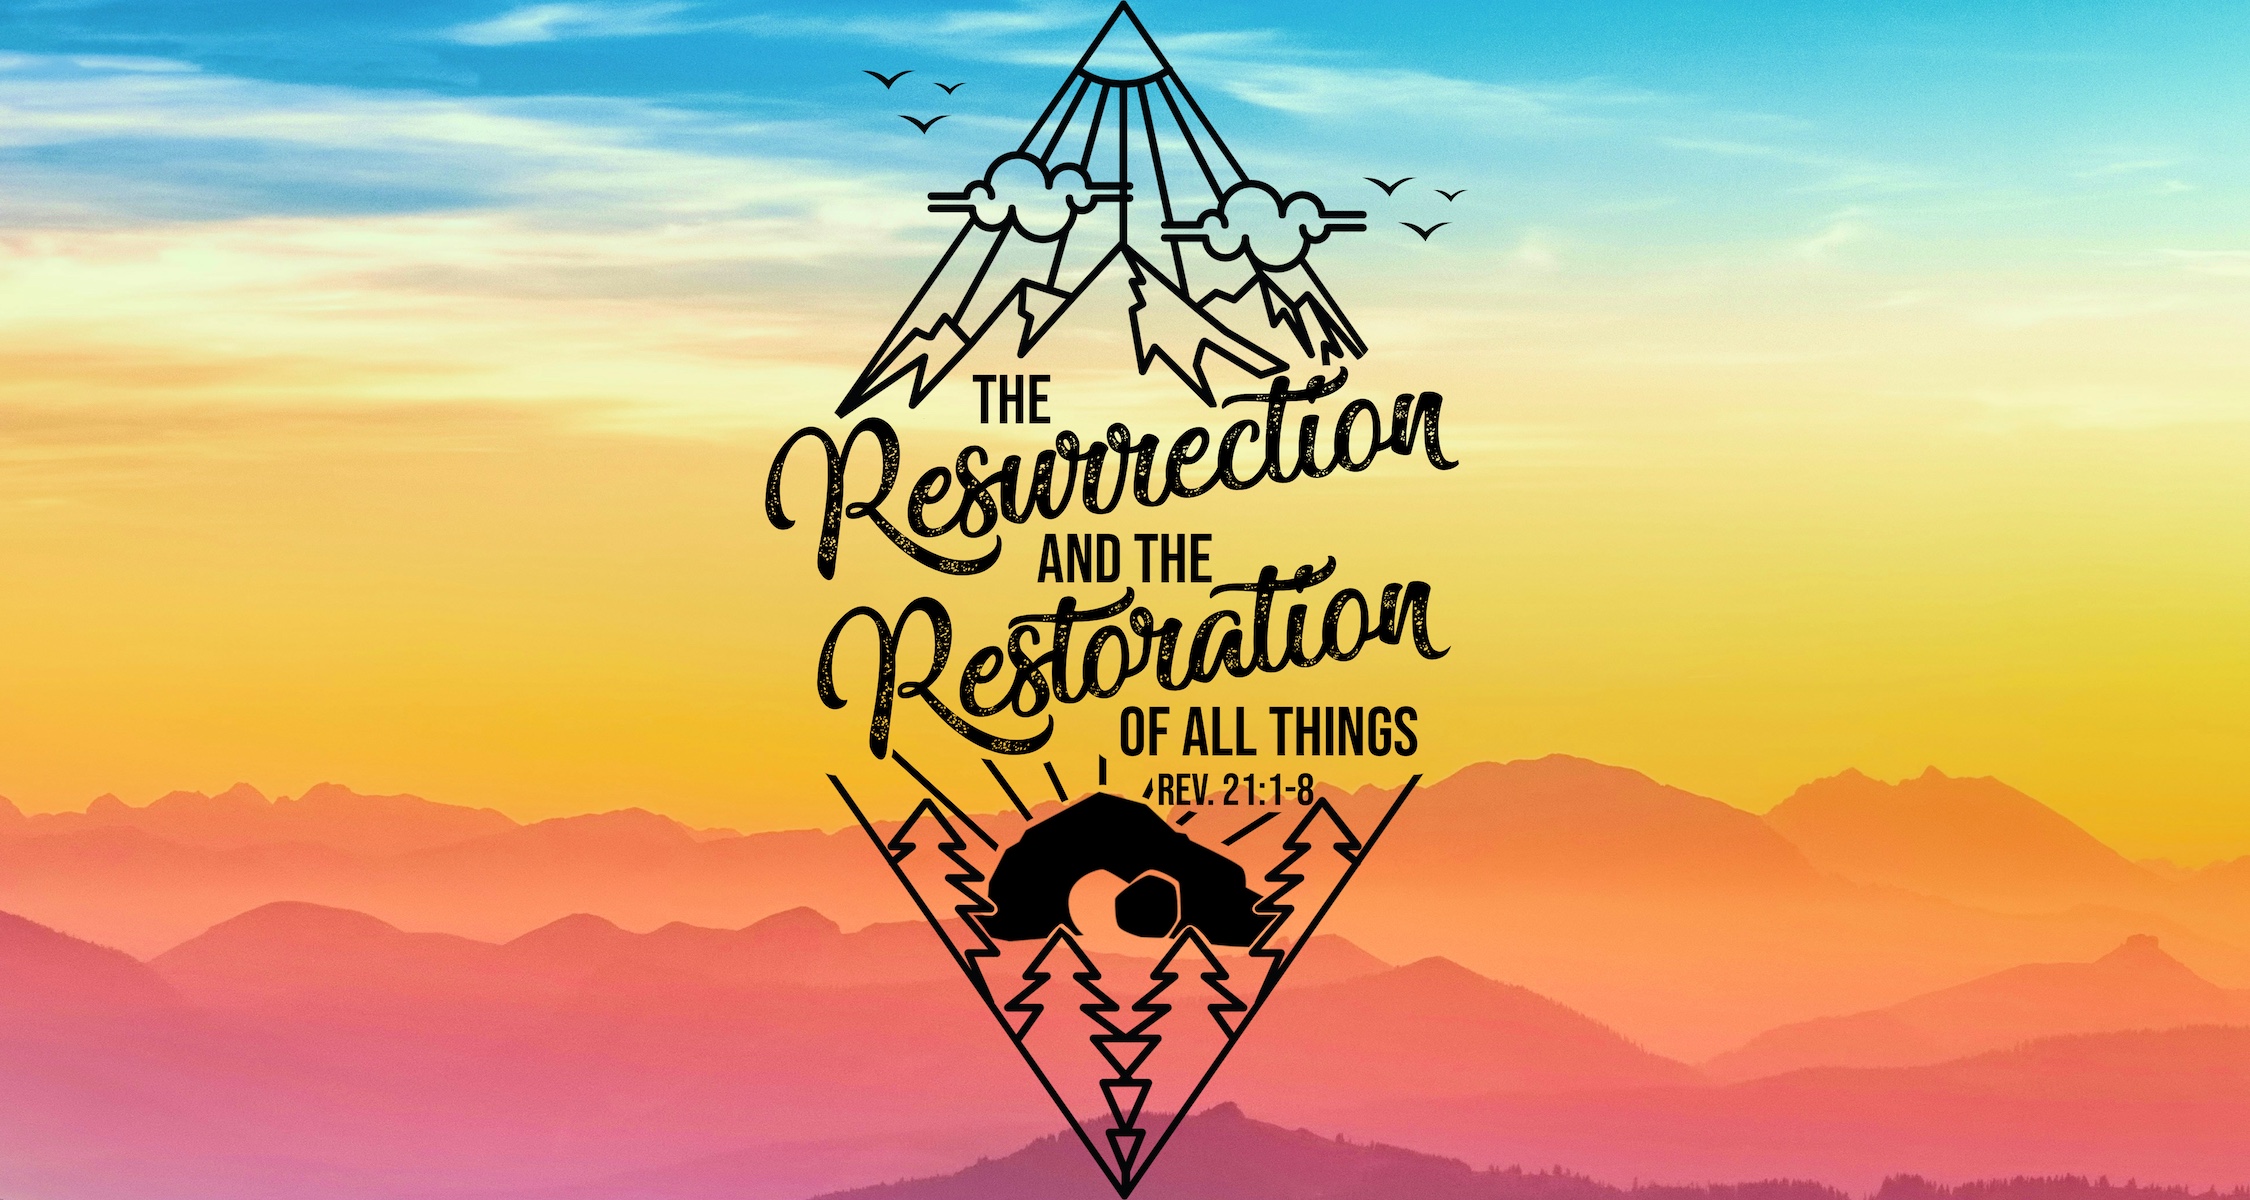 REVELATION 21:1-8 | THE RESURRECTION & THE RESTORATION OF ALL THINGS